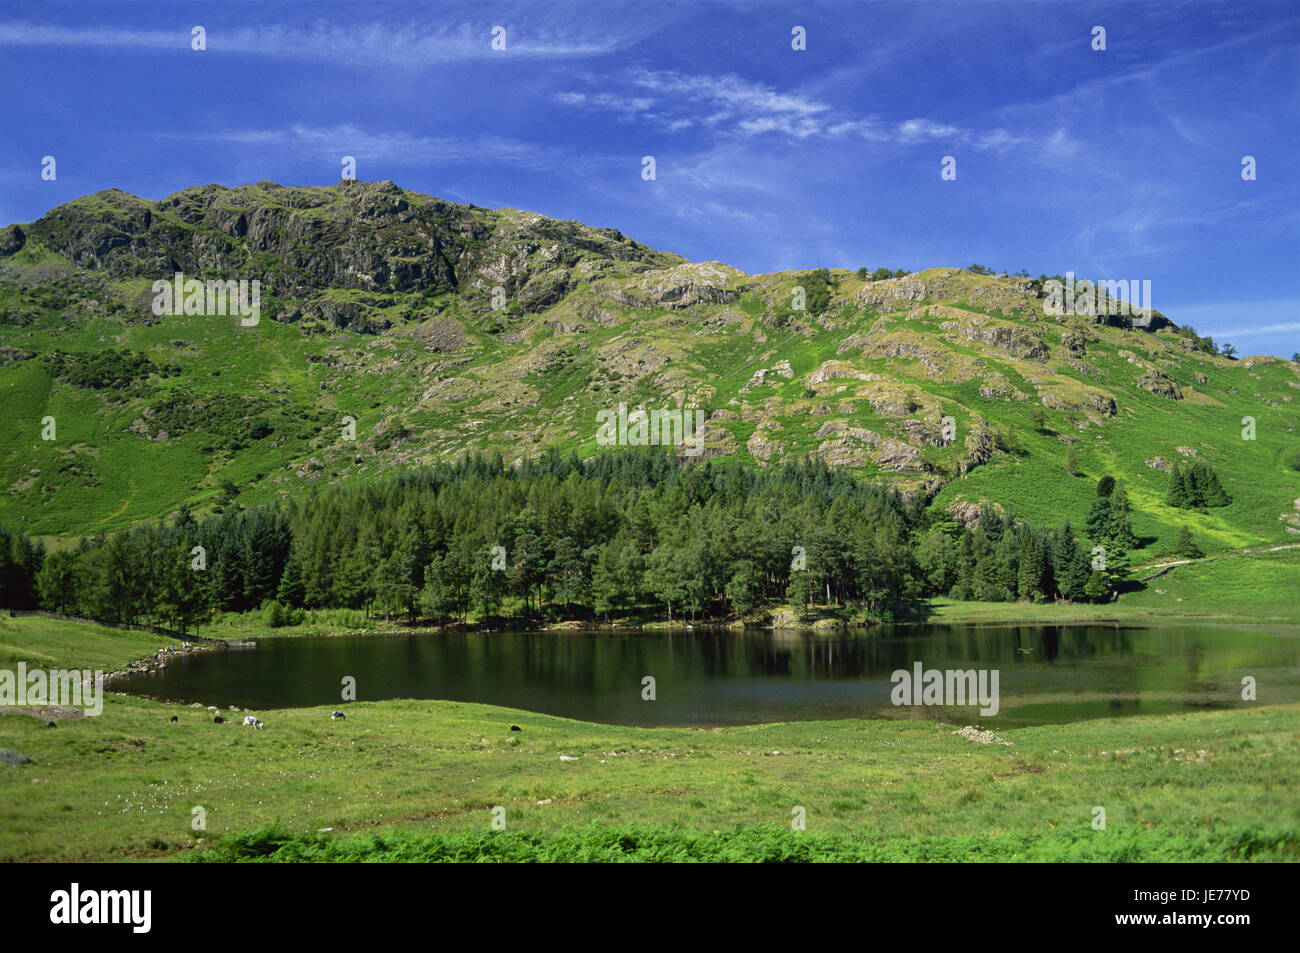 Great Britain, England, Cumbria, brine District, Great Langdale, Blea Camouflaging, lake, Europe, meadows, green, hill, mountains, scenery, mountain landscape, wood, trees, water, nature, remotely, Idyll, deserted, animals, graze, graze, Stock Photo